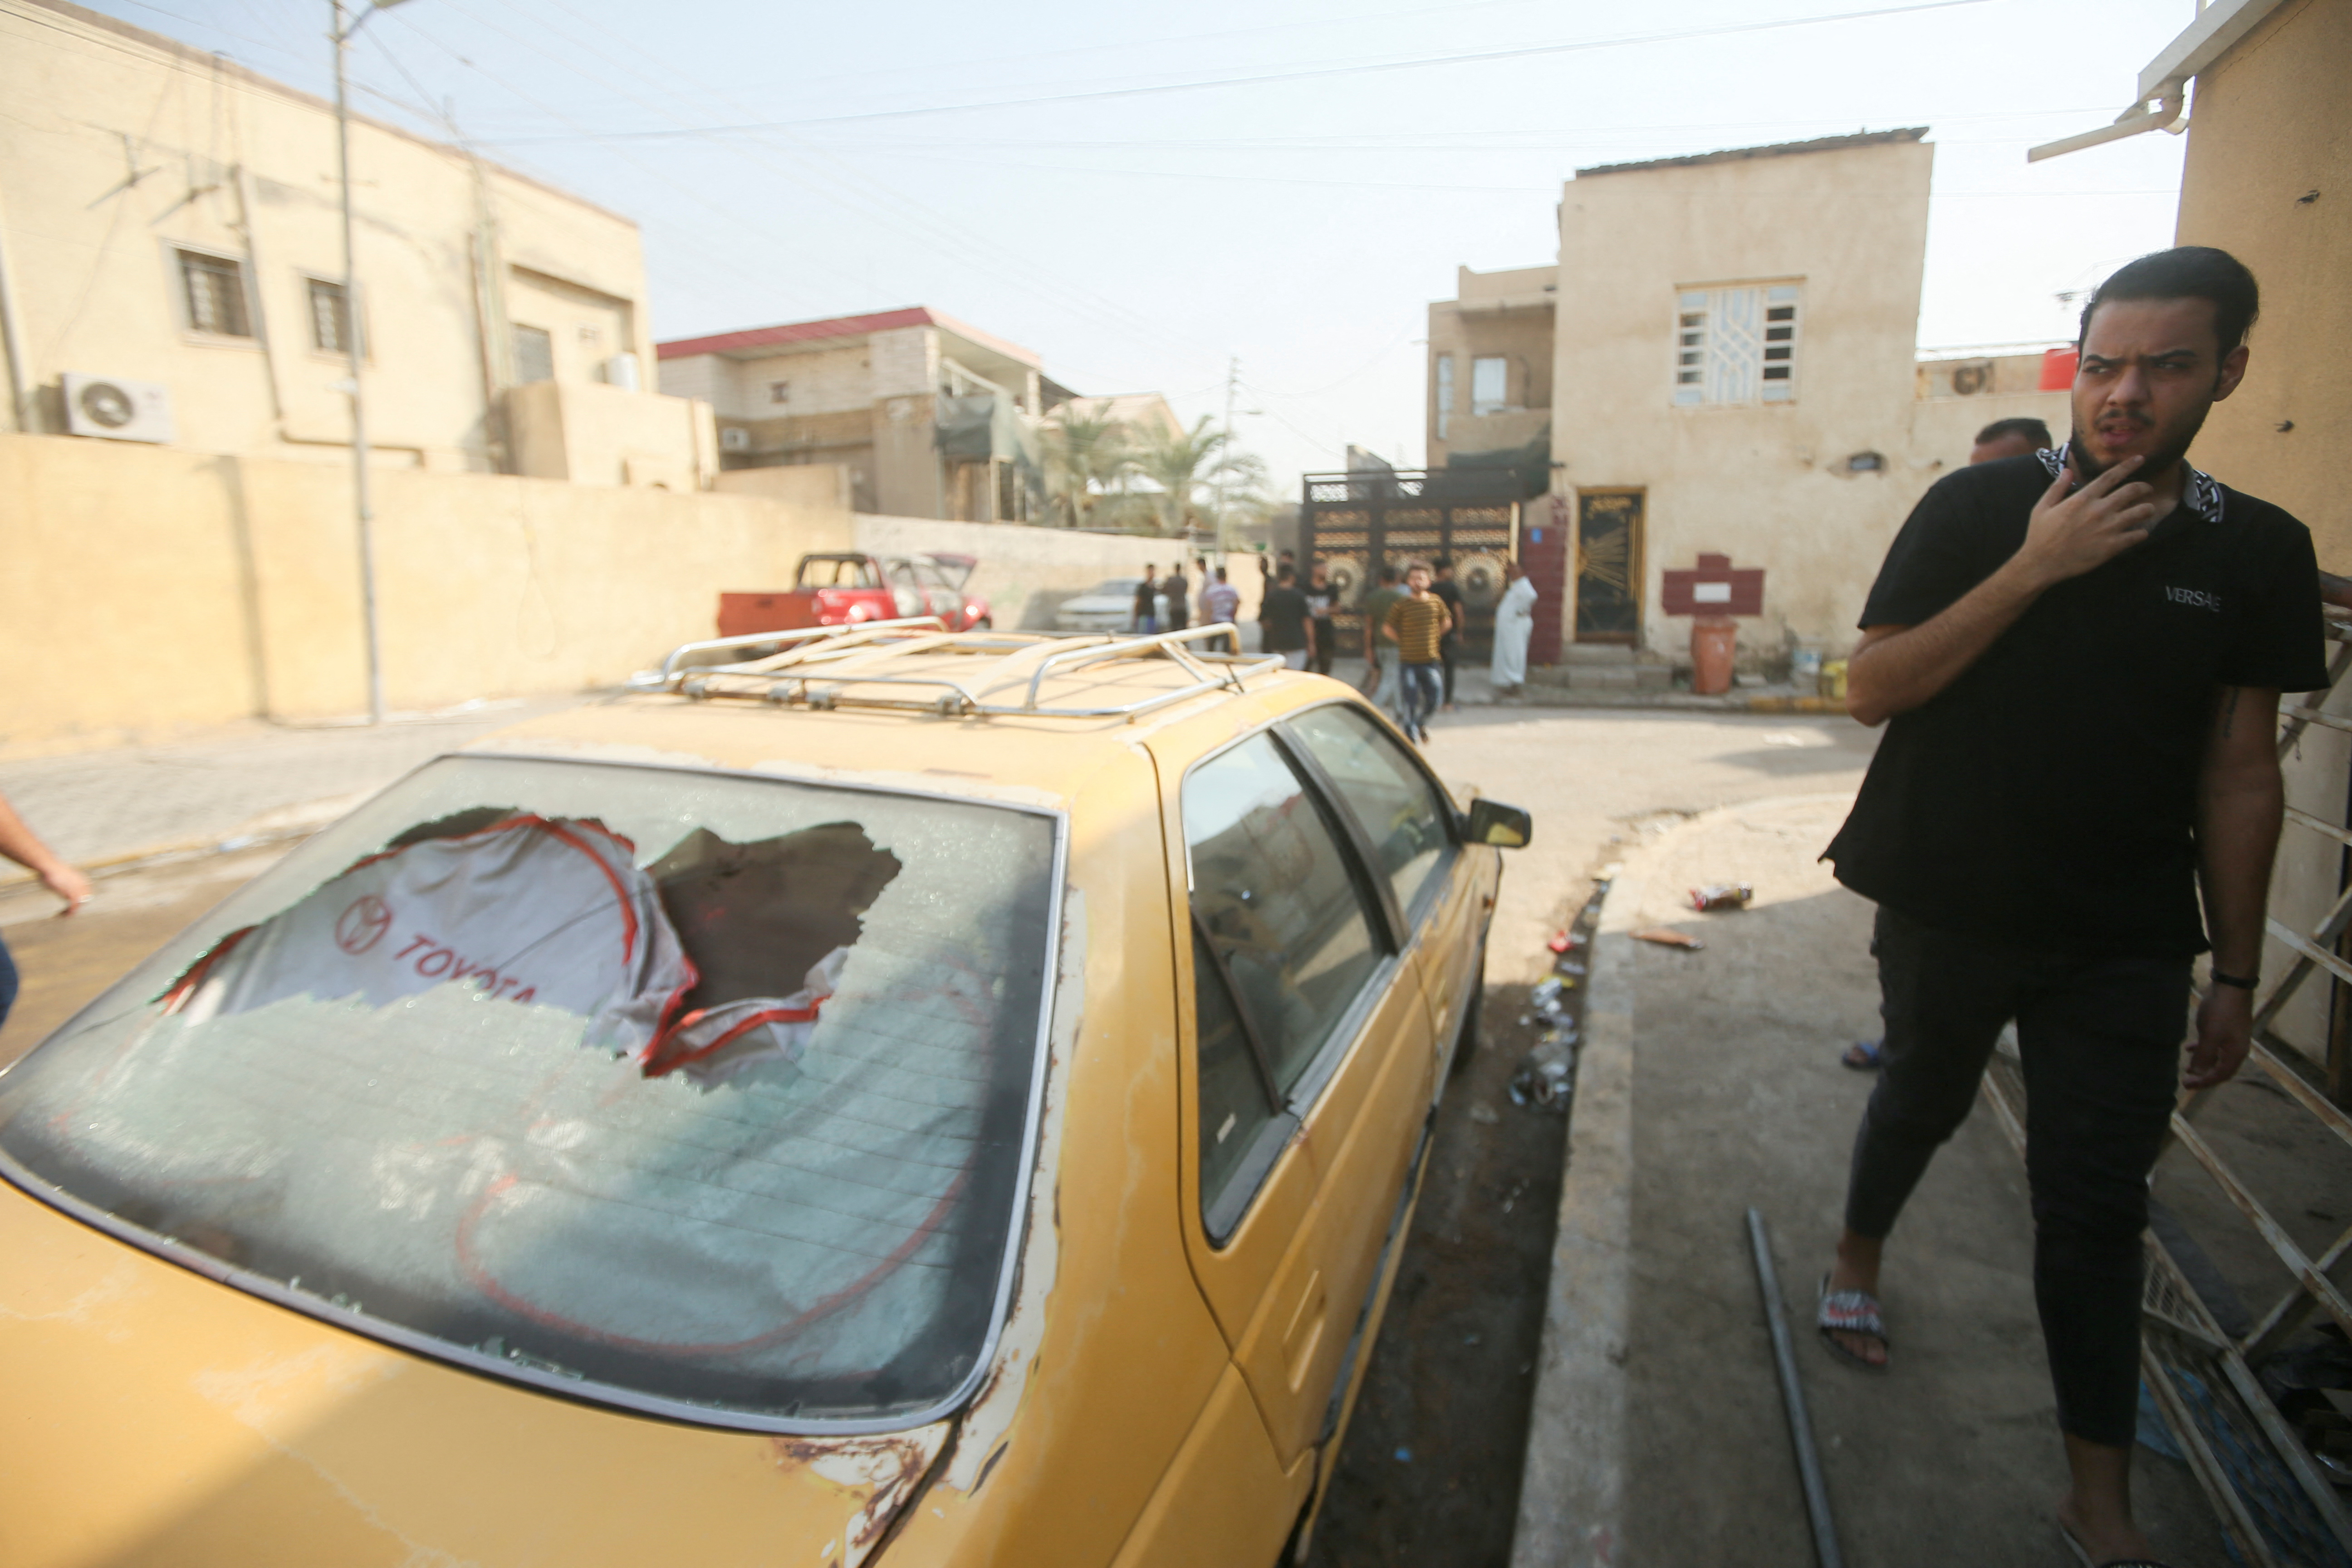 A man walks past a damaged vehicle on a street aftermath of clashes among rival Shiite Muslim militants in Basra